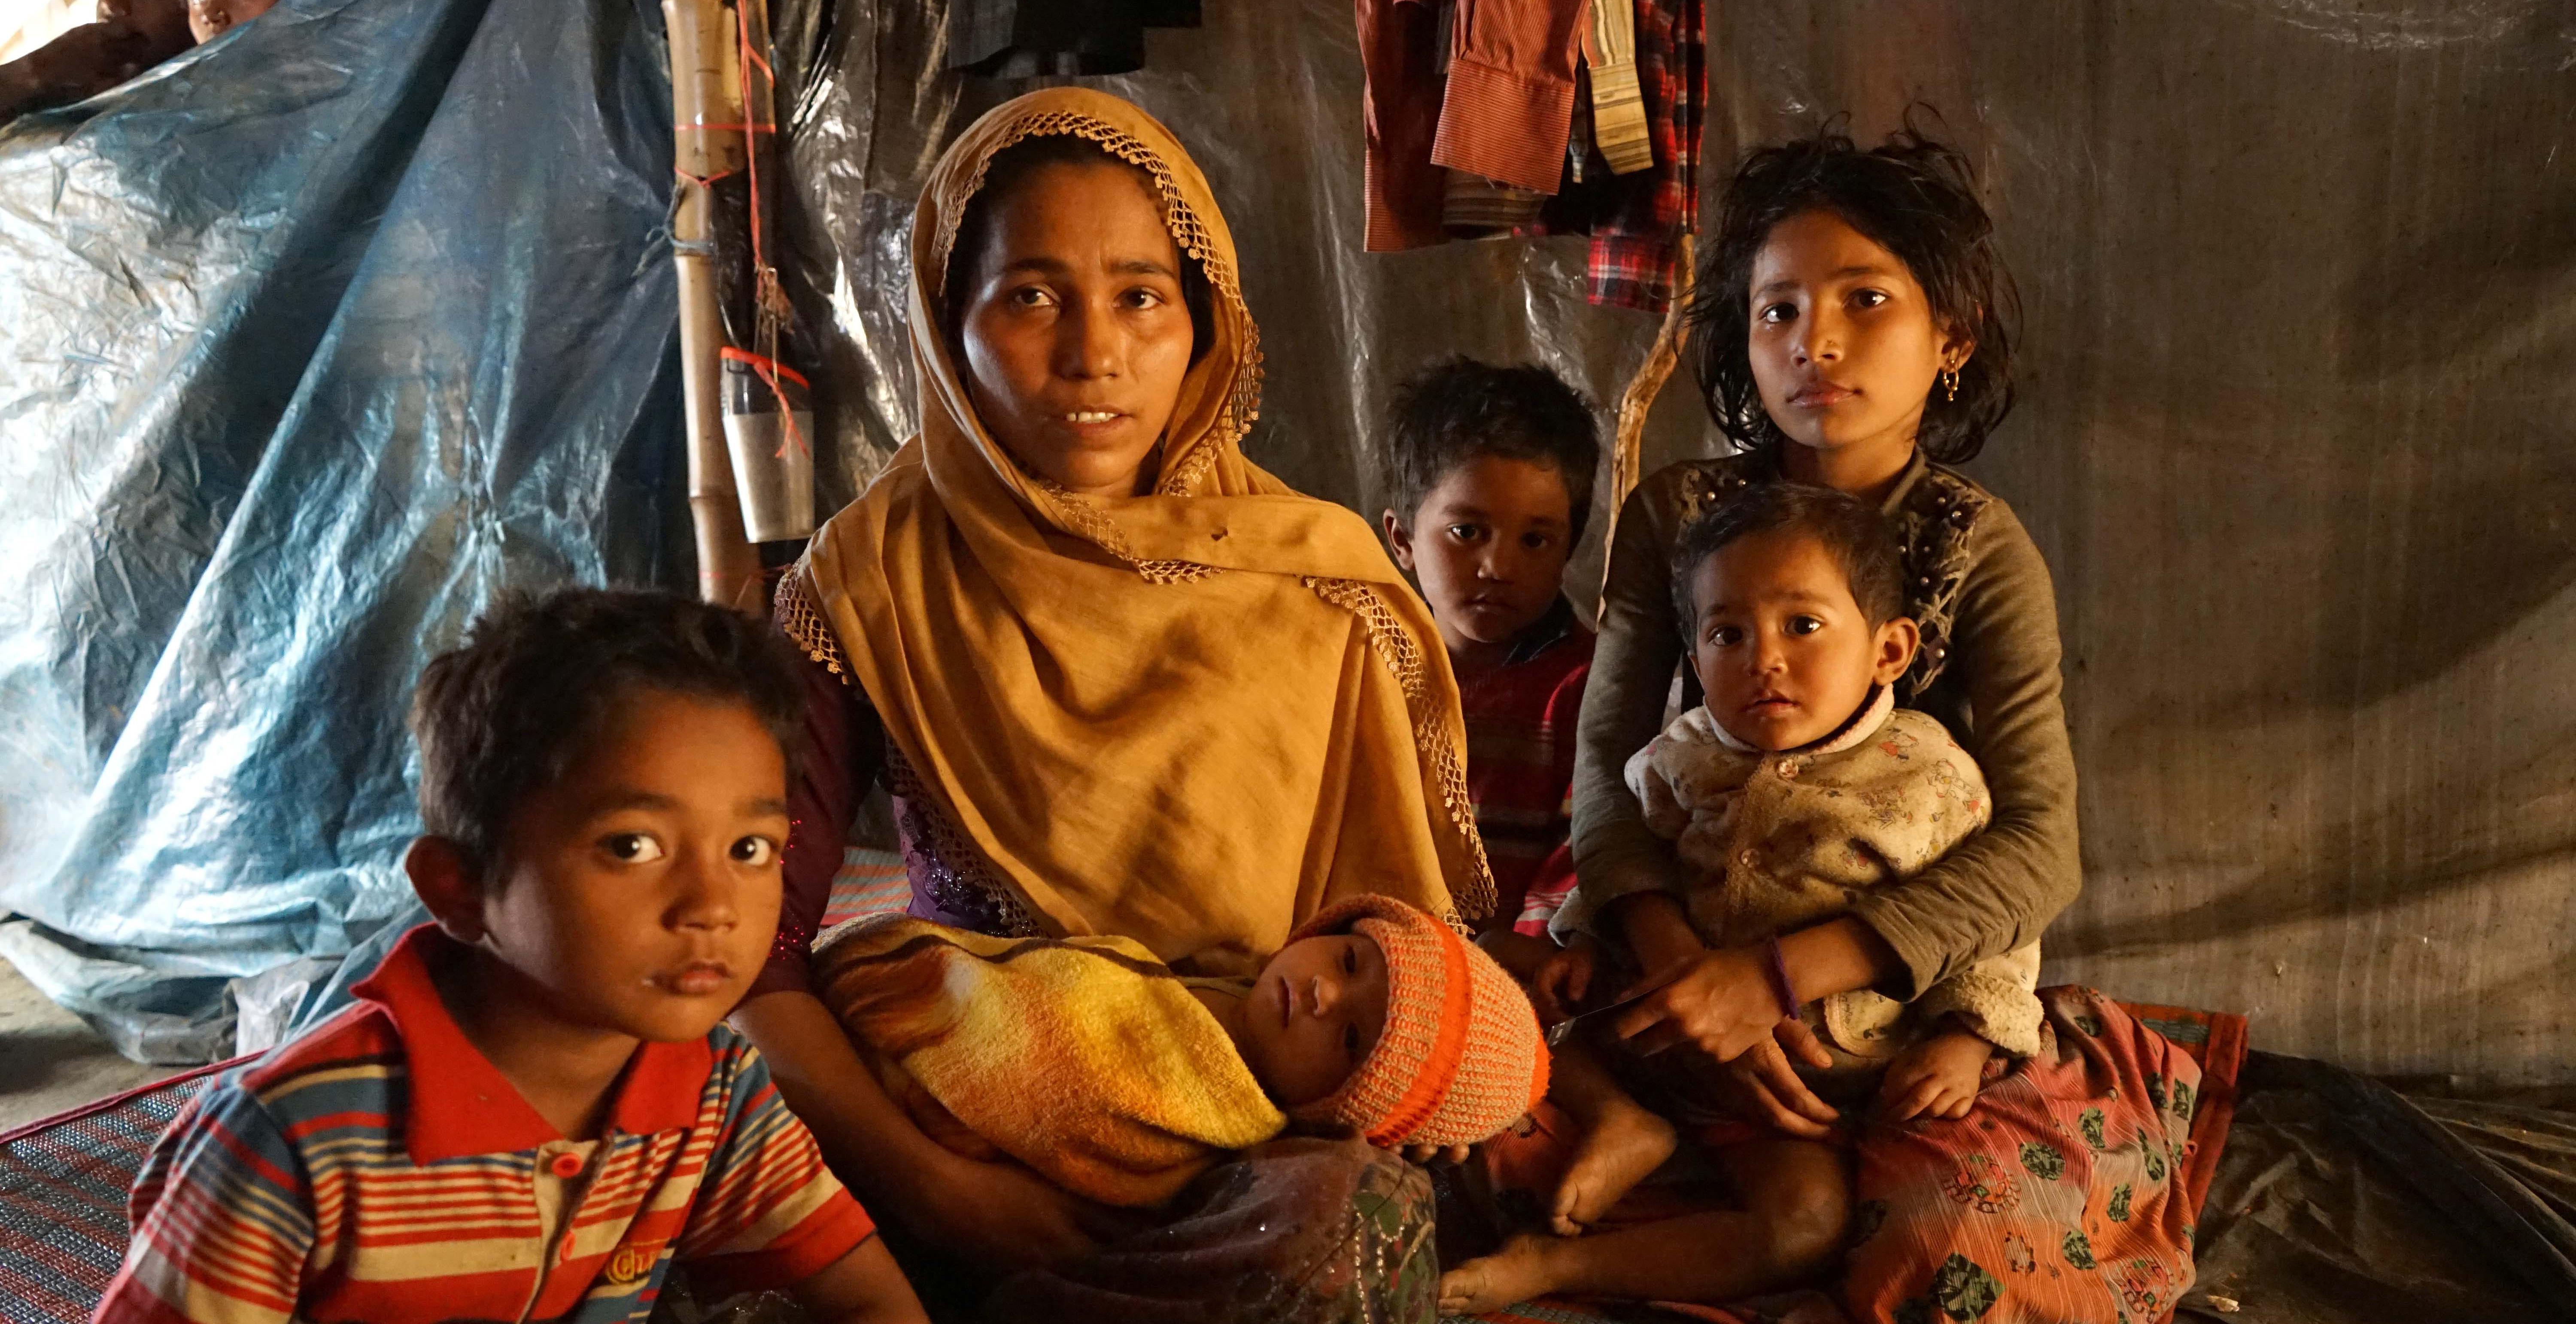 A mother and her 5 children, Bangladesh 2018.